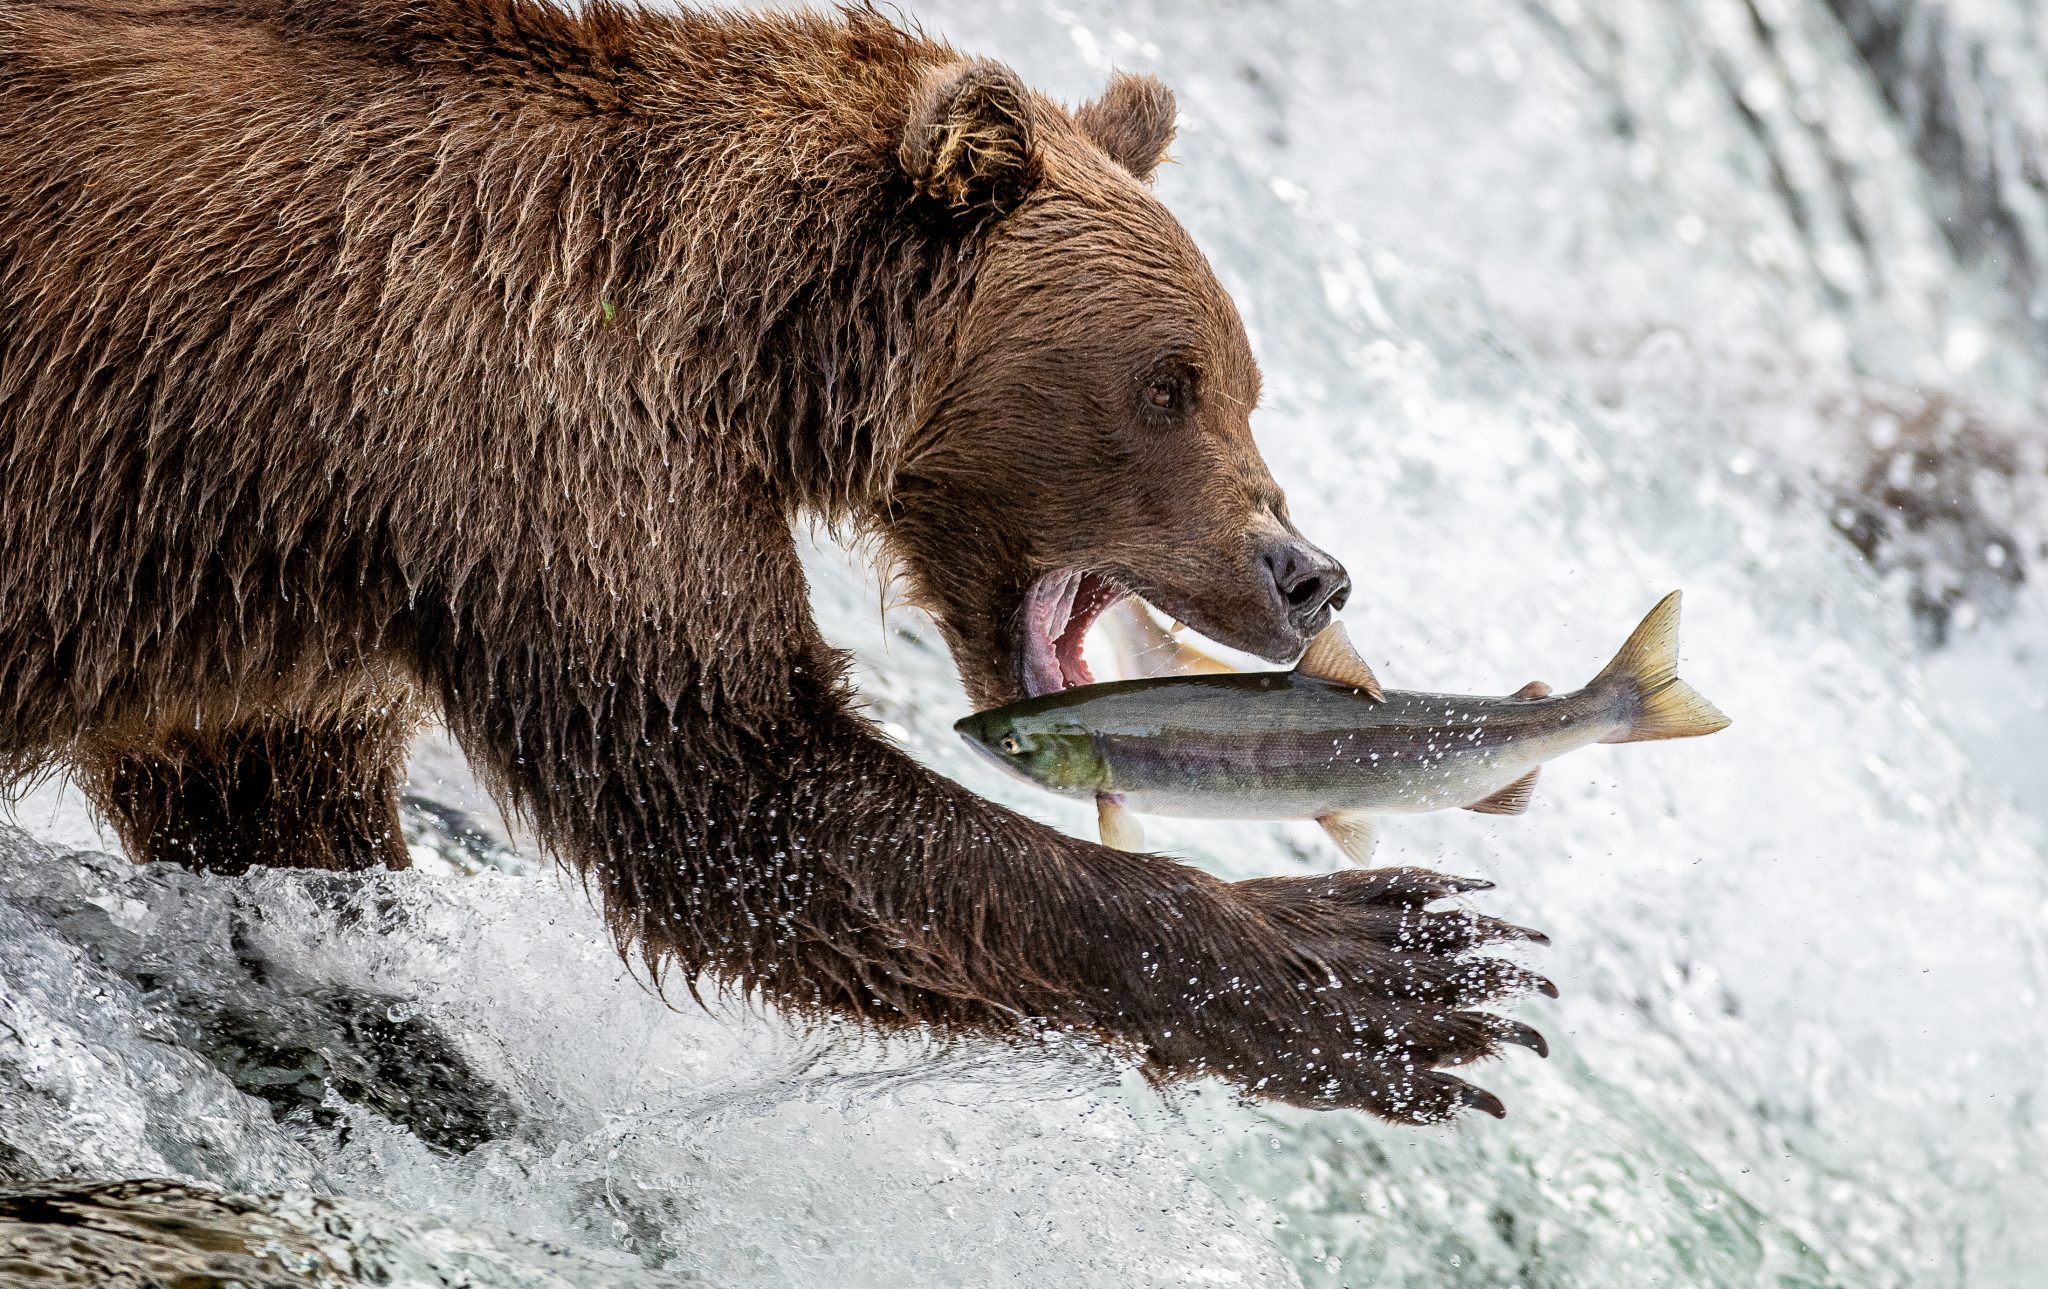 Brown bear grabbing a salmon in a whitewater stream